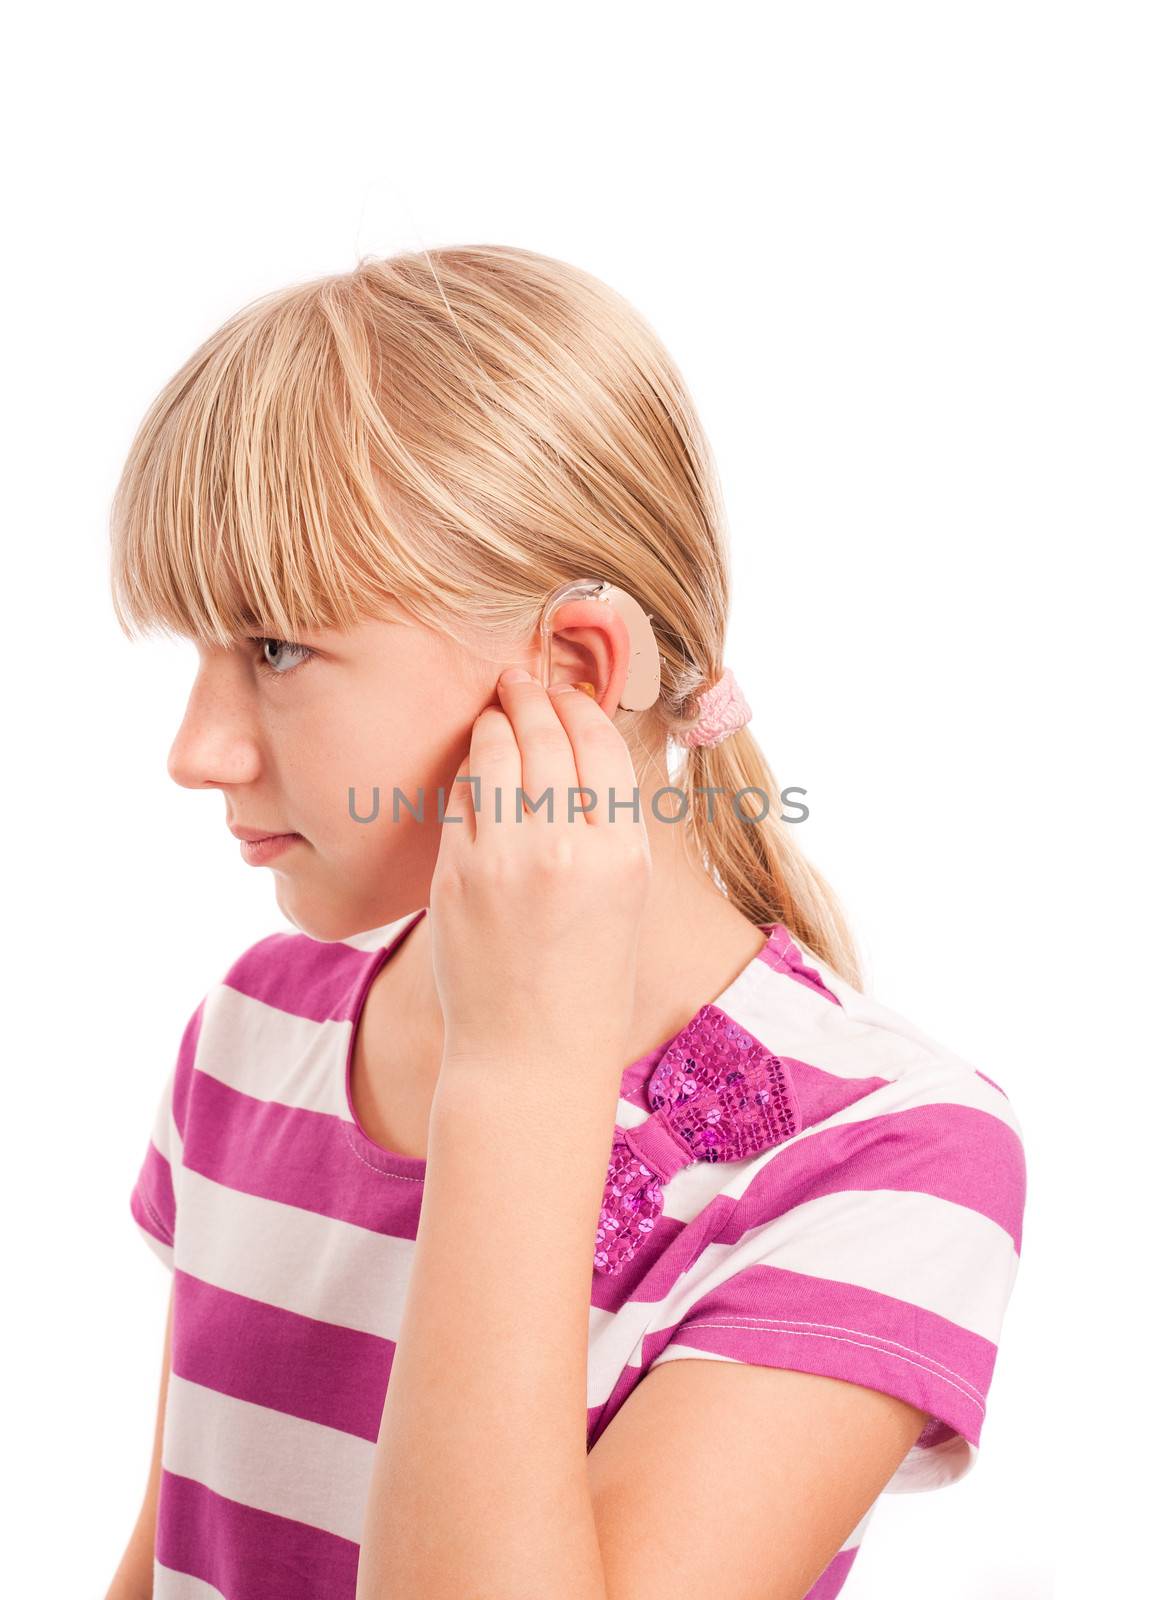 Setting a Hearing aid - Young female setting her hearing aid isolated on white